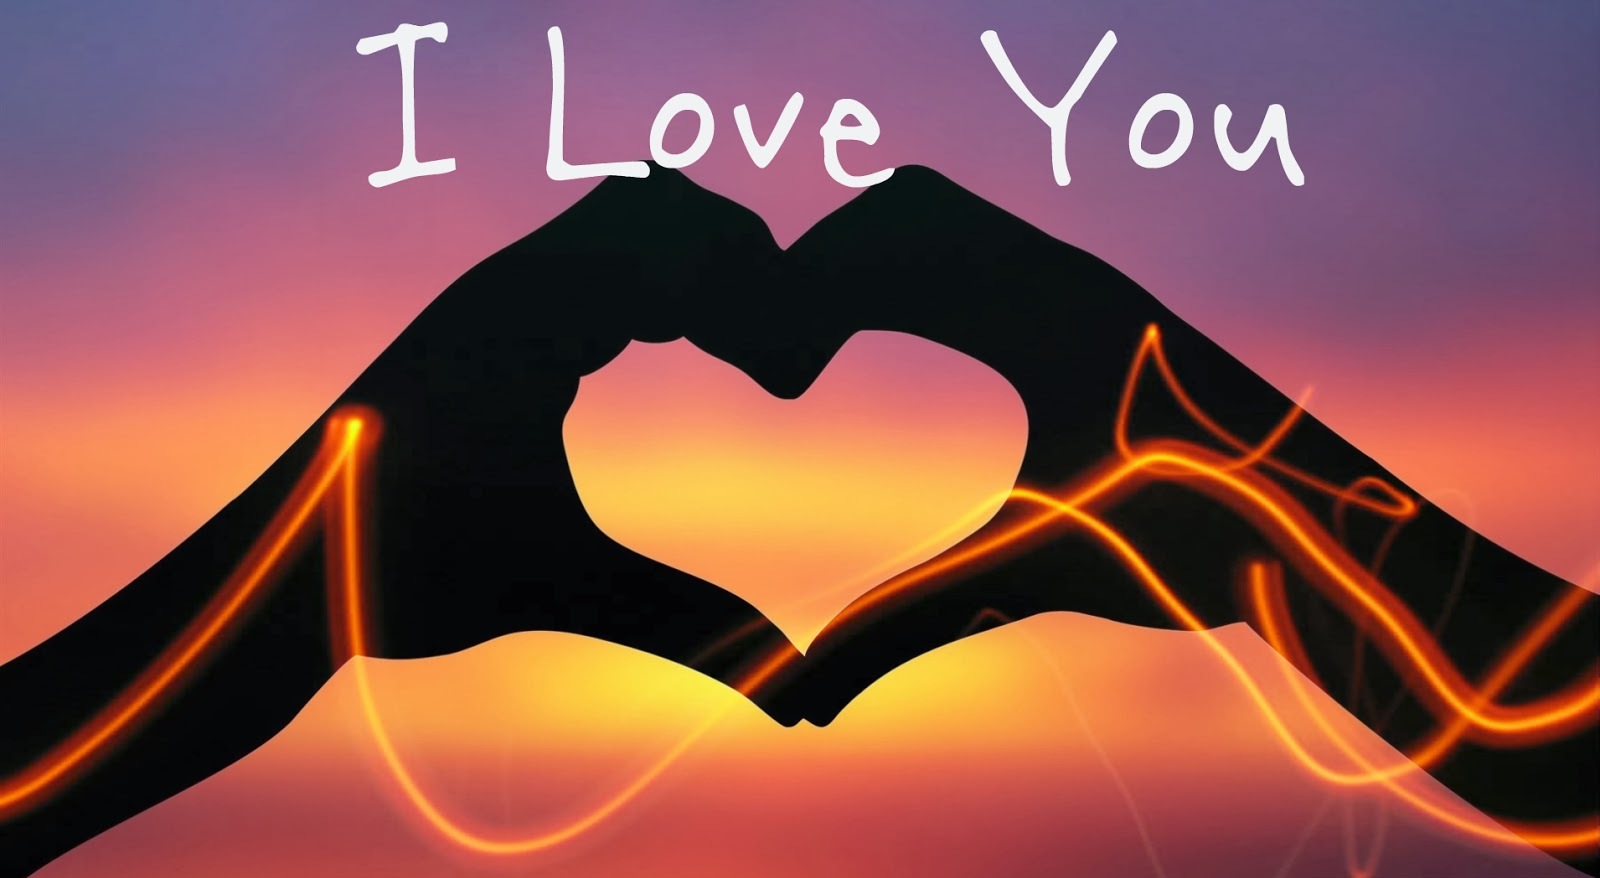 I-Love-You-HD-Wallpaper-4 - Love Messages, Images and Quotes